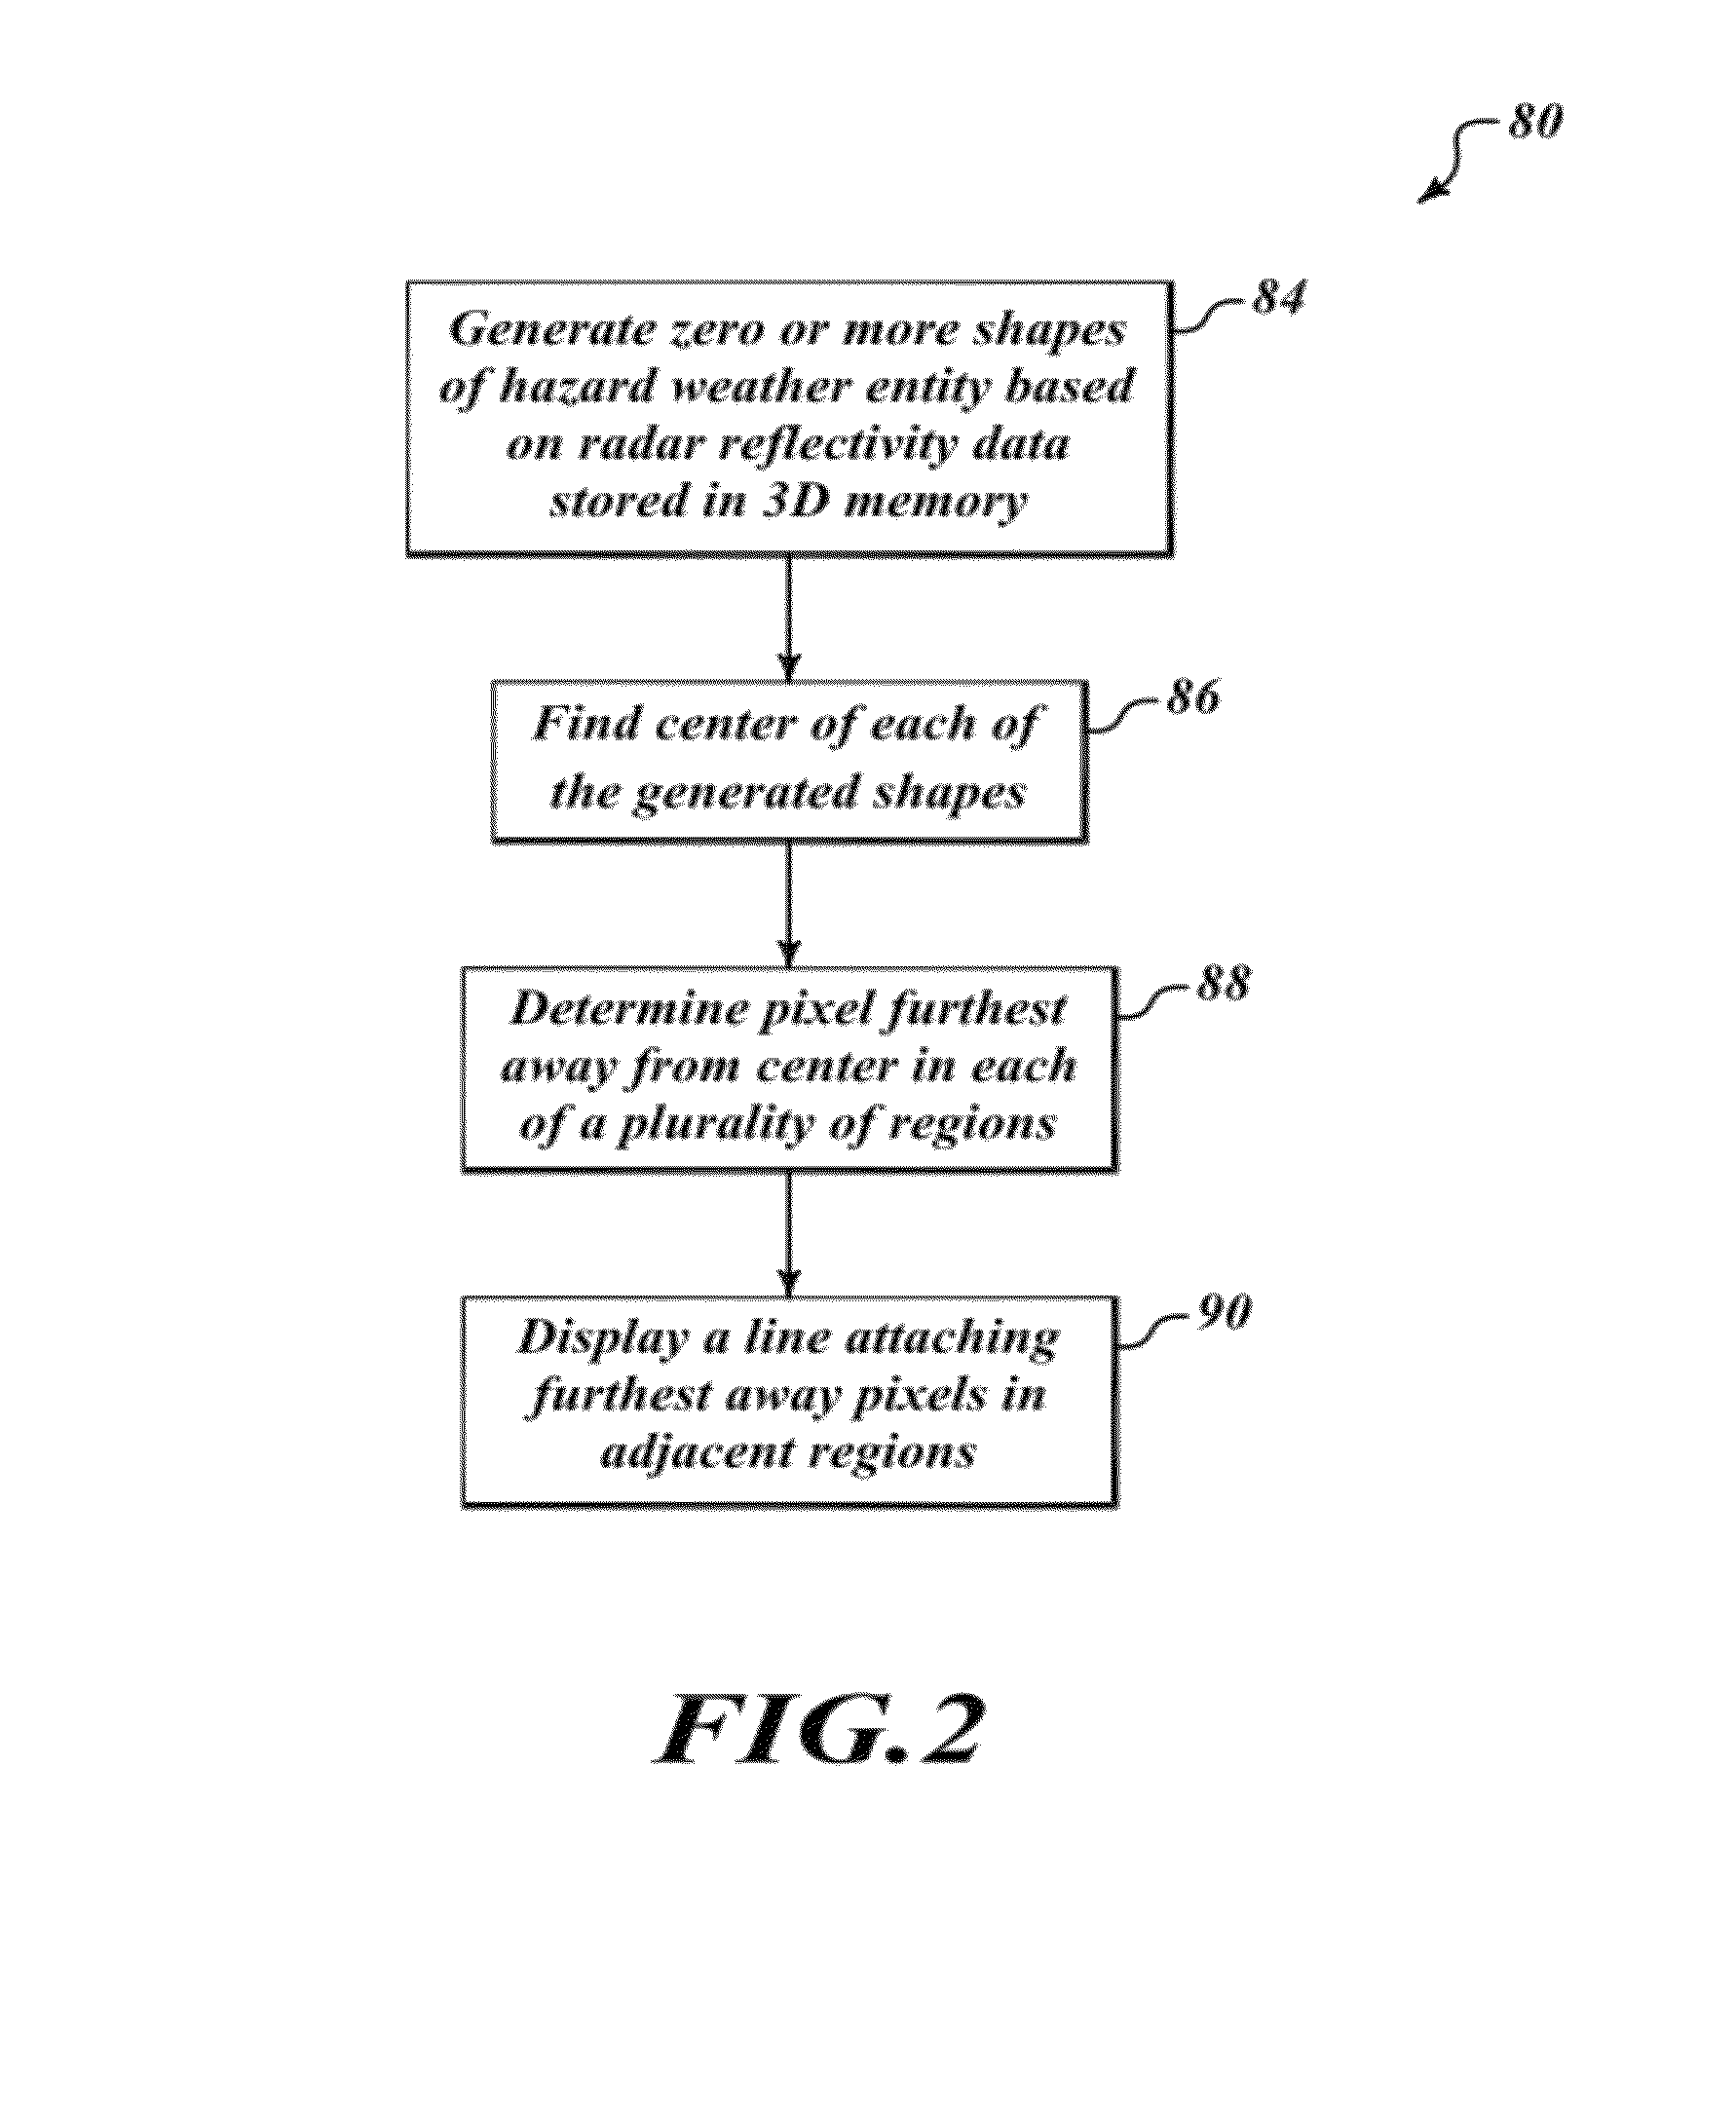 Methods and systems for identifying hazardous flight zone areas on a display